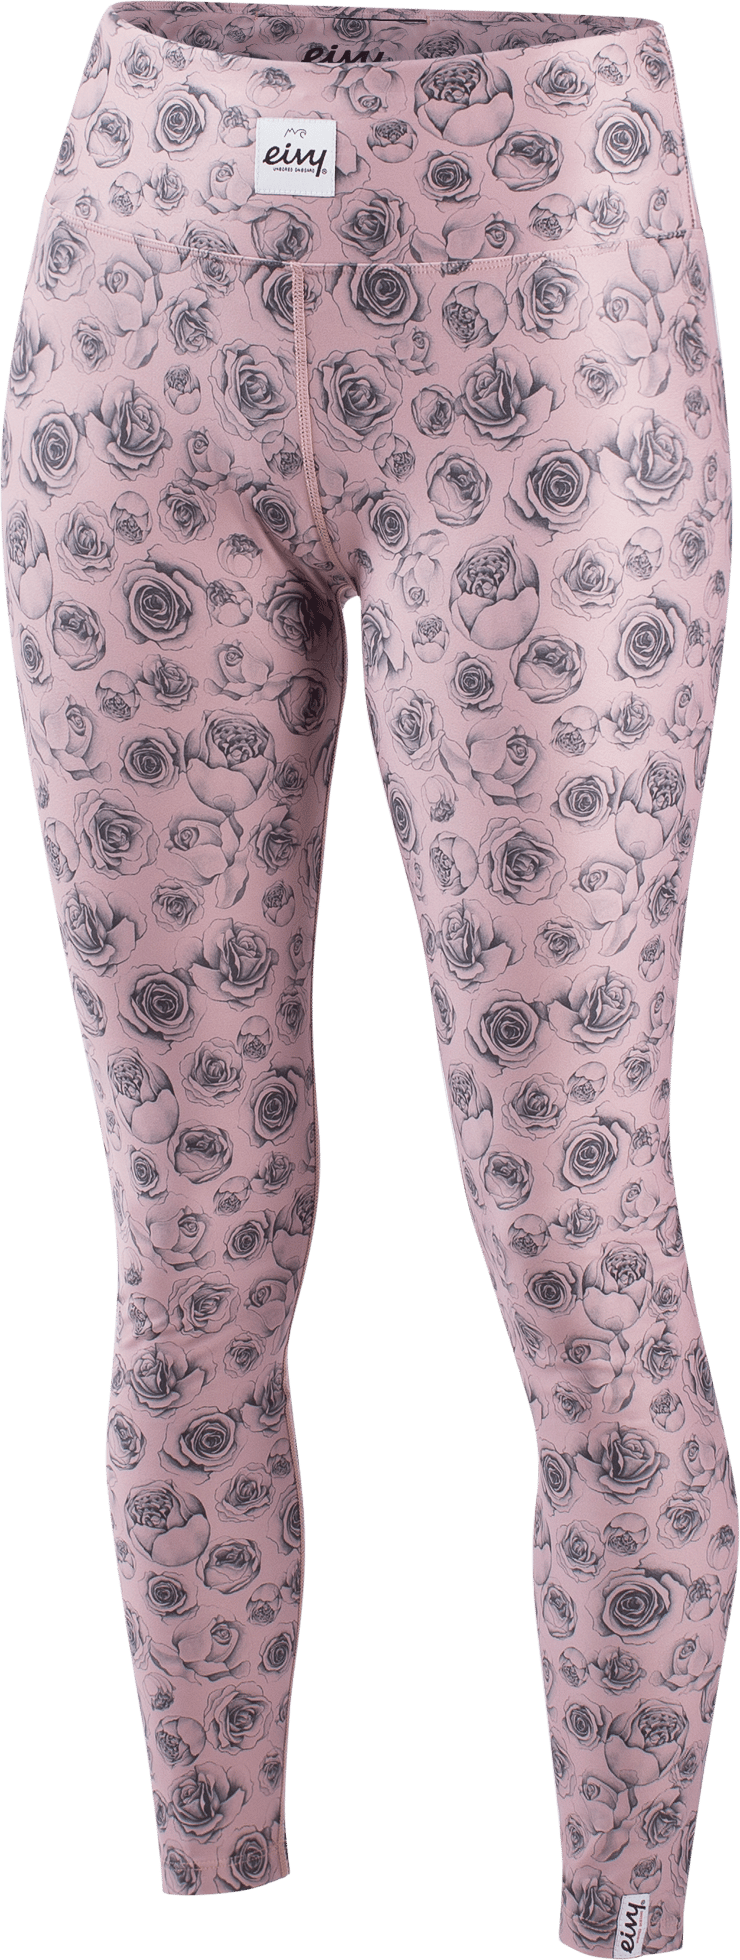 Eivy Women's Icecold Tights Charcoal Woodrose